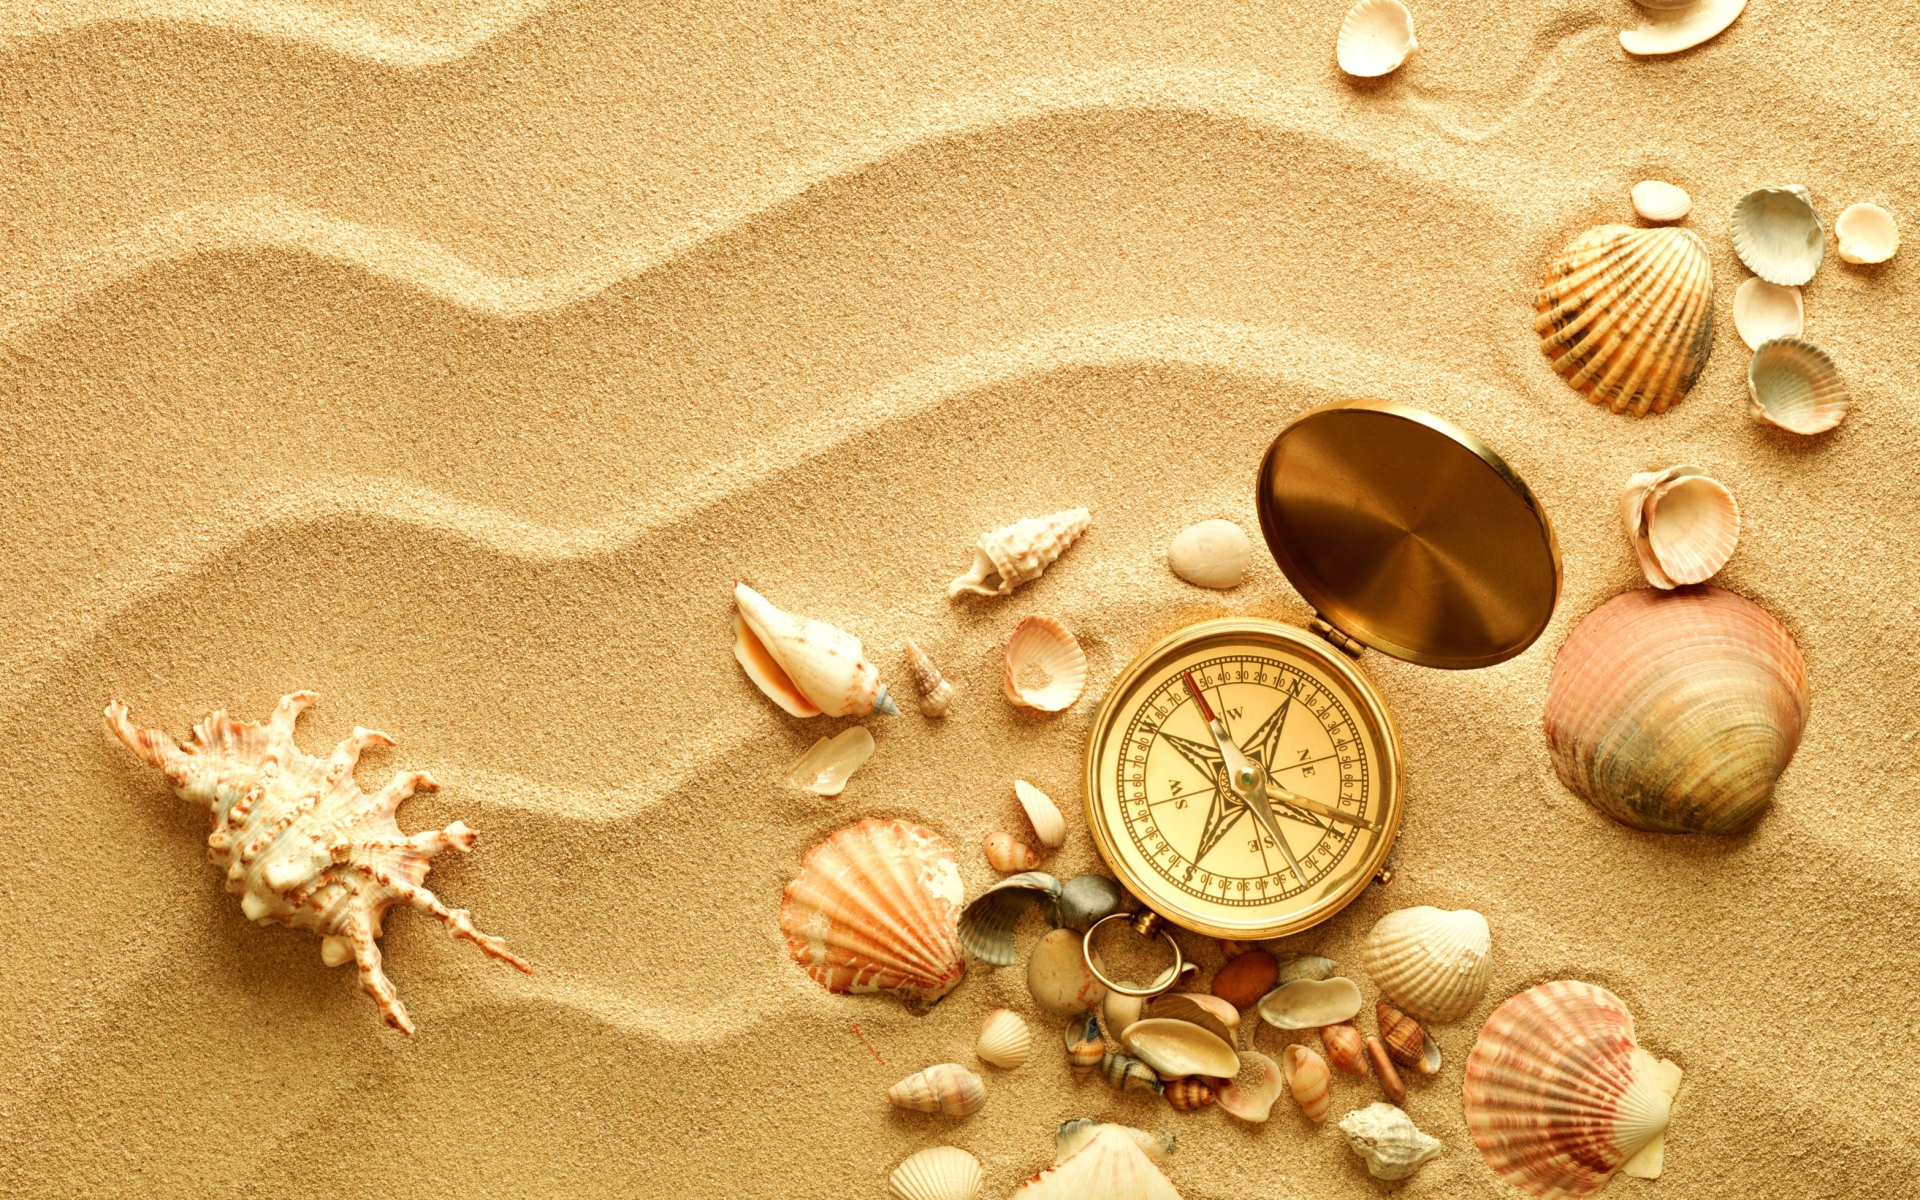 Compass And Shells On Sand wallpaper 1920x1200